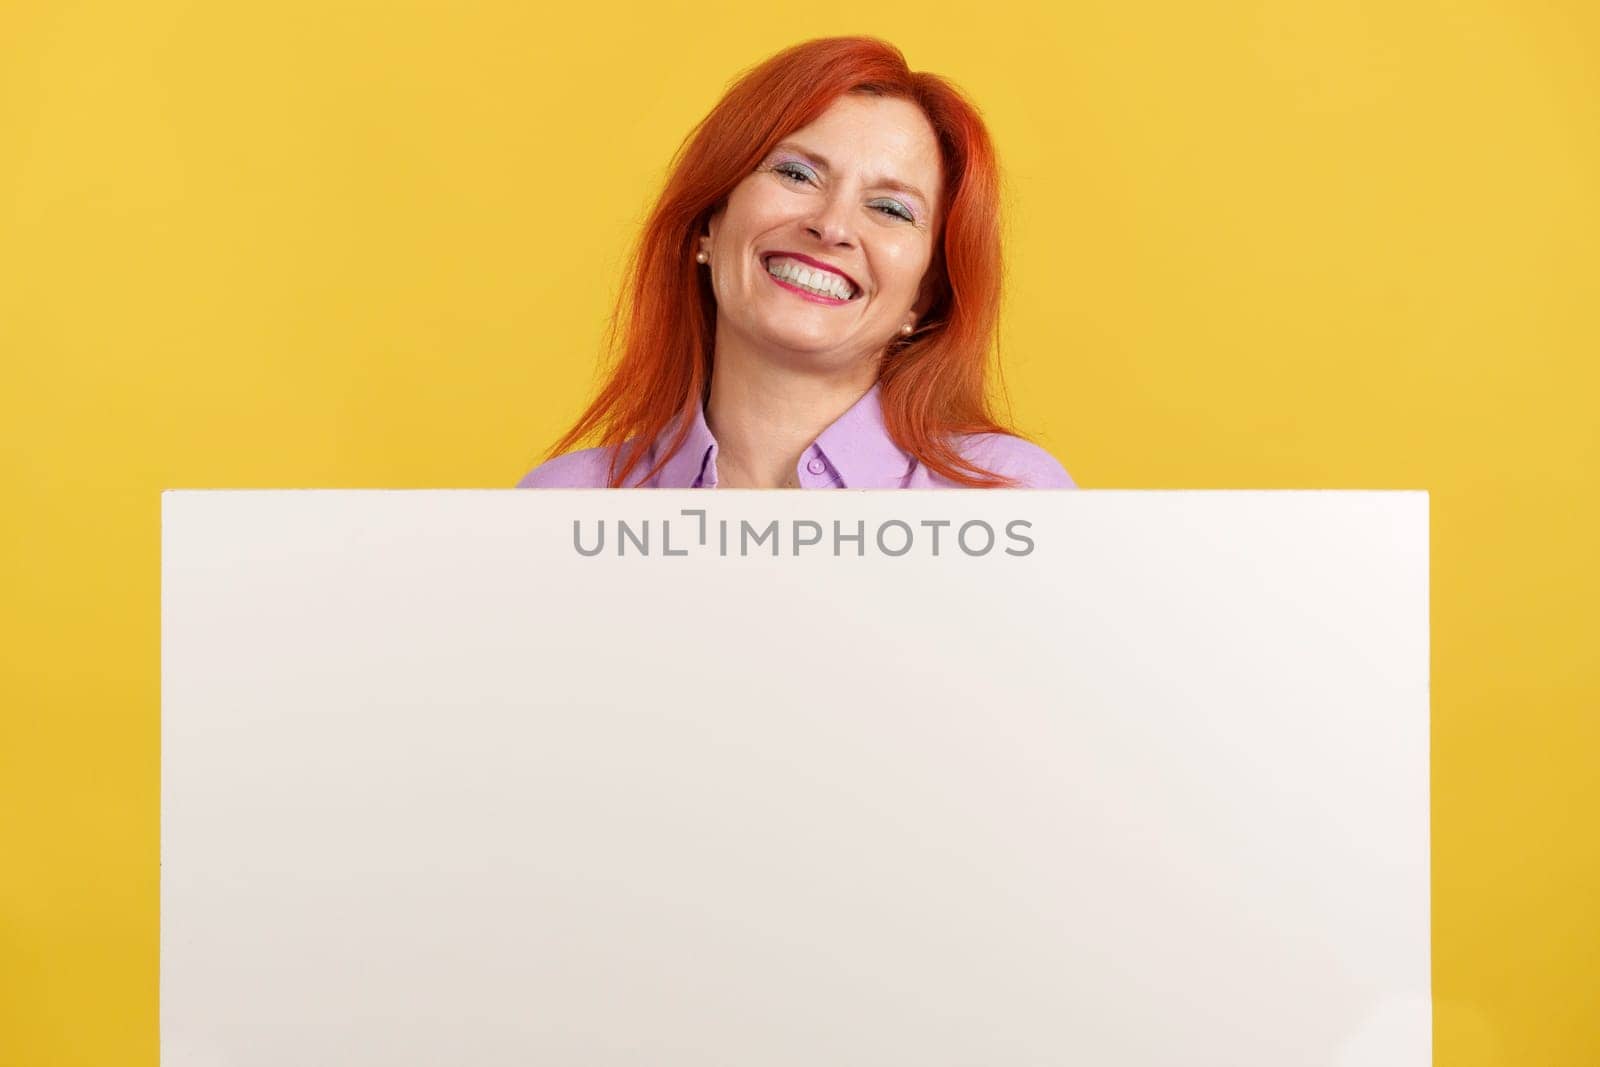 Mature redheaded woman holding a blank panel while smiling at the camera in studio with yellow background